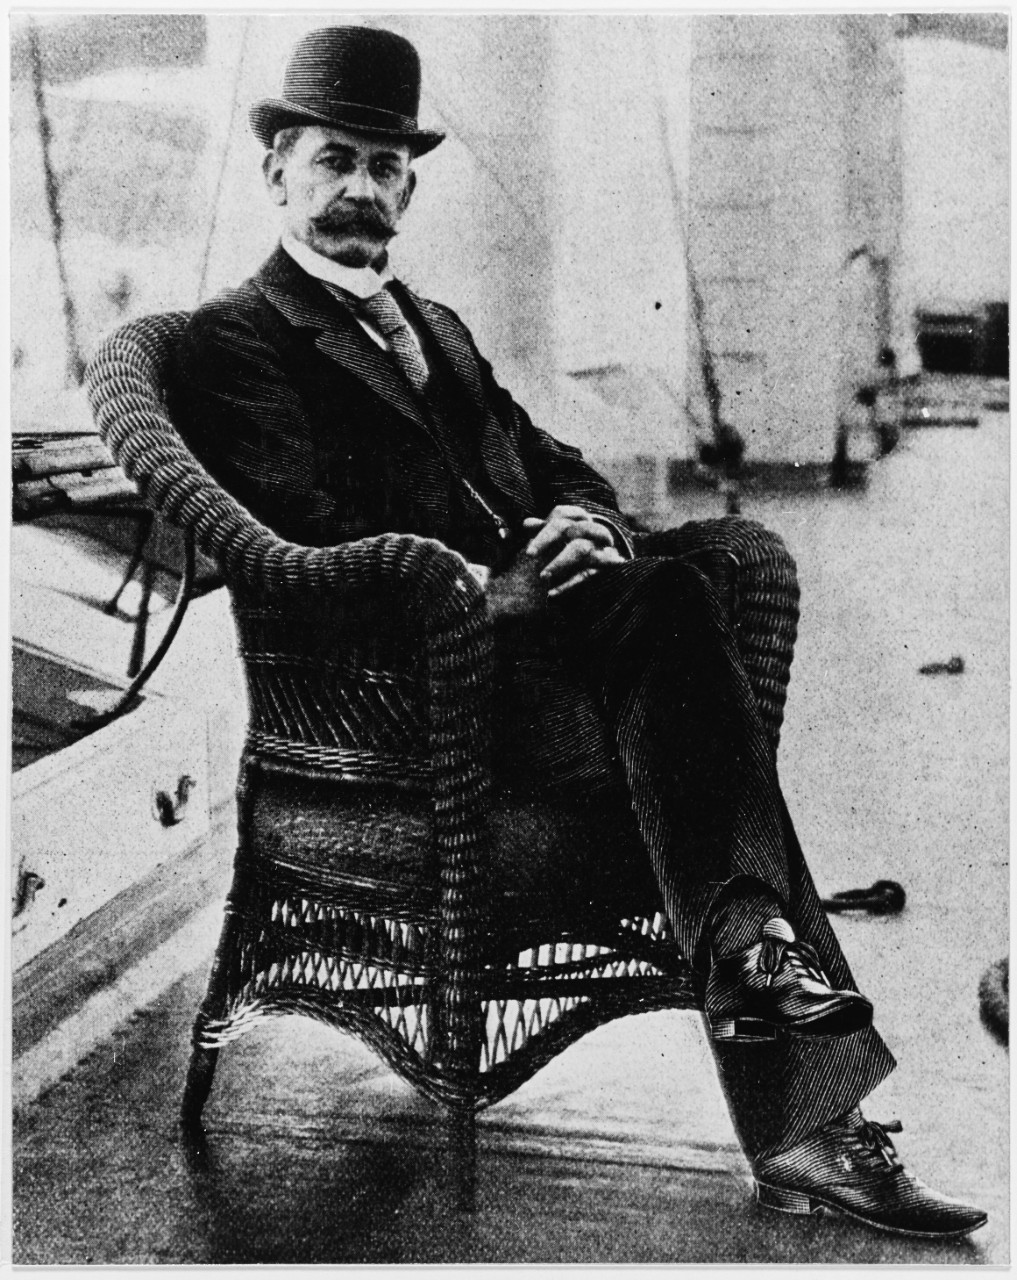 Captain Charles D. Sigsbee, USN, circa 1897, aboard the USS MAINE. 